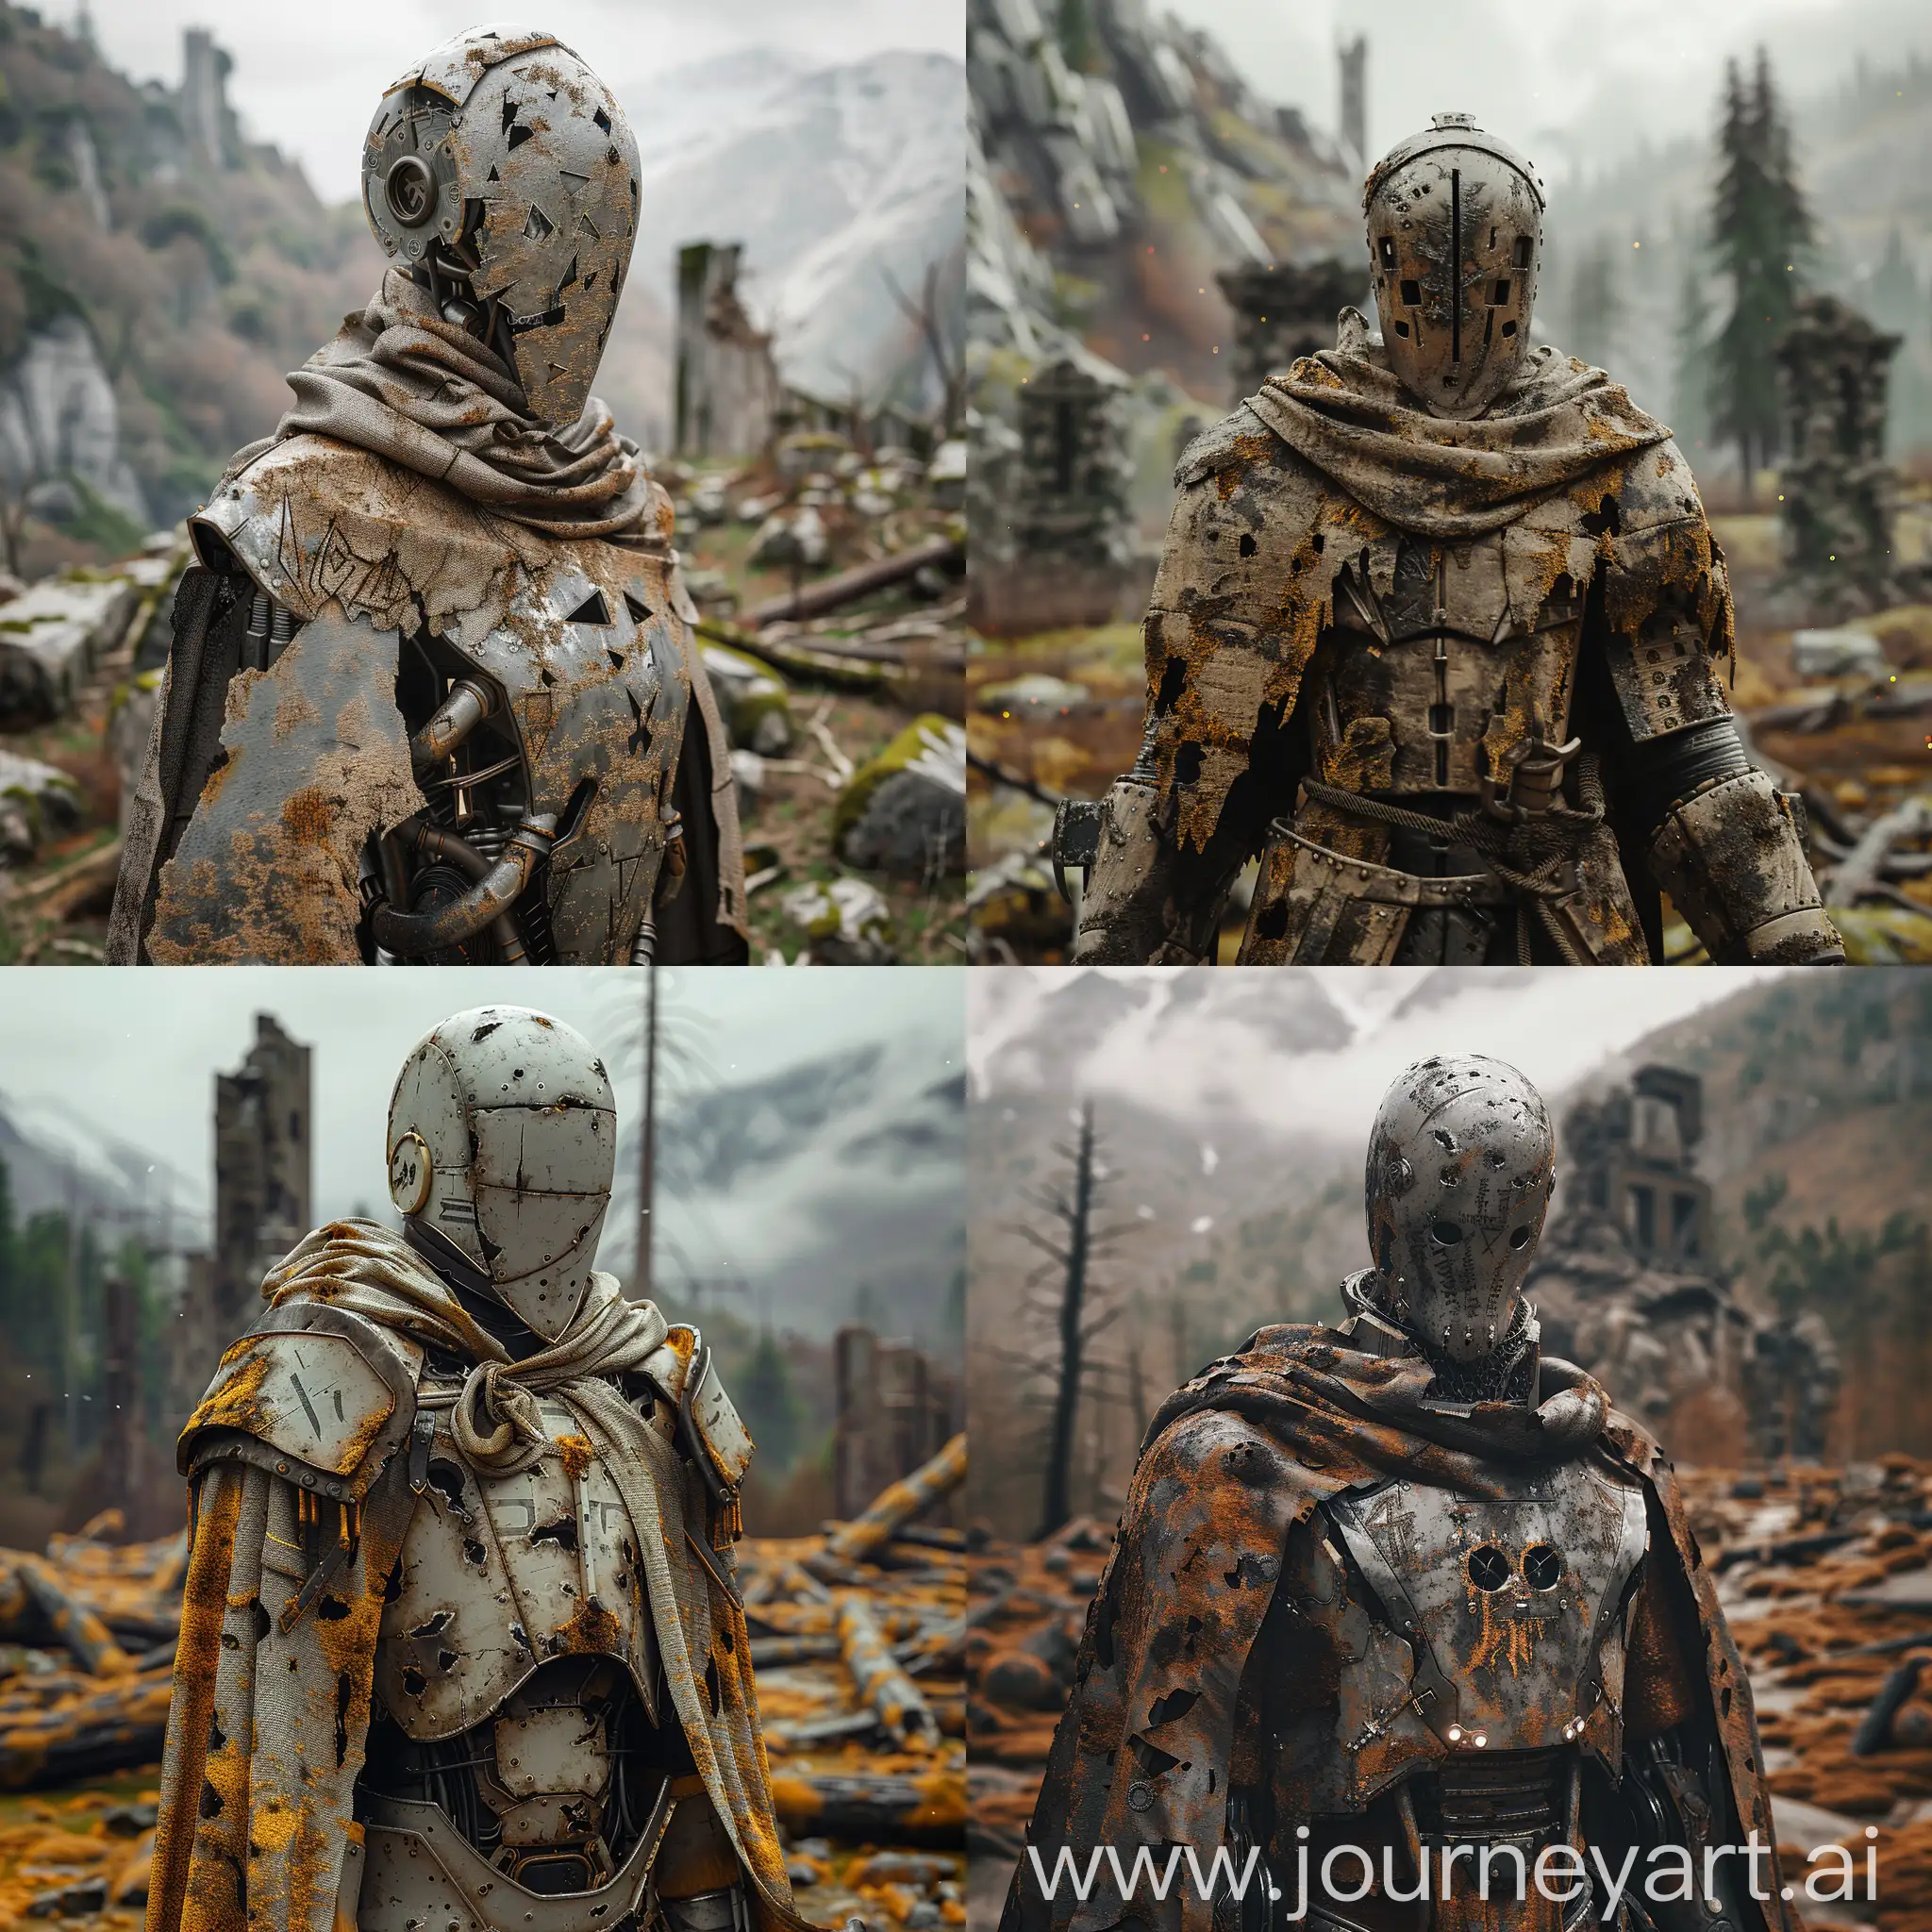 Masterpiece, 4k, unreal engine m5, volumetric lighting, dof, bokeh, hyper realism, adof, vignette, dust, moss, aged, scarred, burnt, runic, holy, magic, scorcerer, mech, robot, 
warforged, dnd, light armour, dark fantasy, fantasy featureless helmet, highly detailed, tattered robes, burnt robes, destroyed land, castle ruins in background, burnt wood, unmarked tombs, mountainous background, dead forest